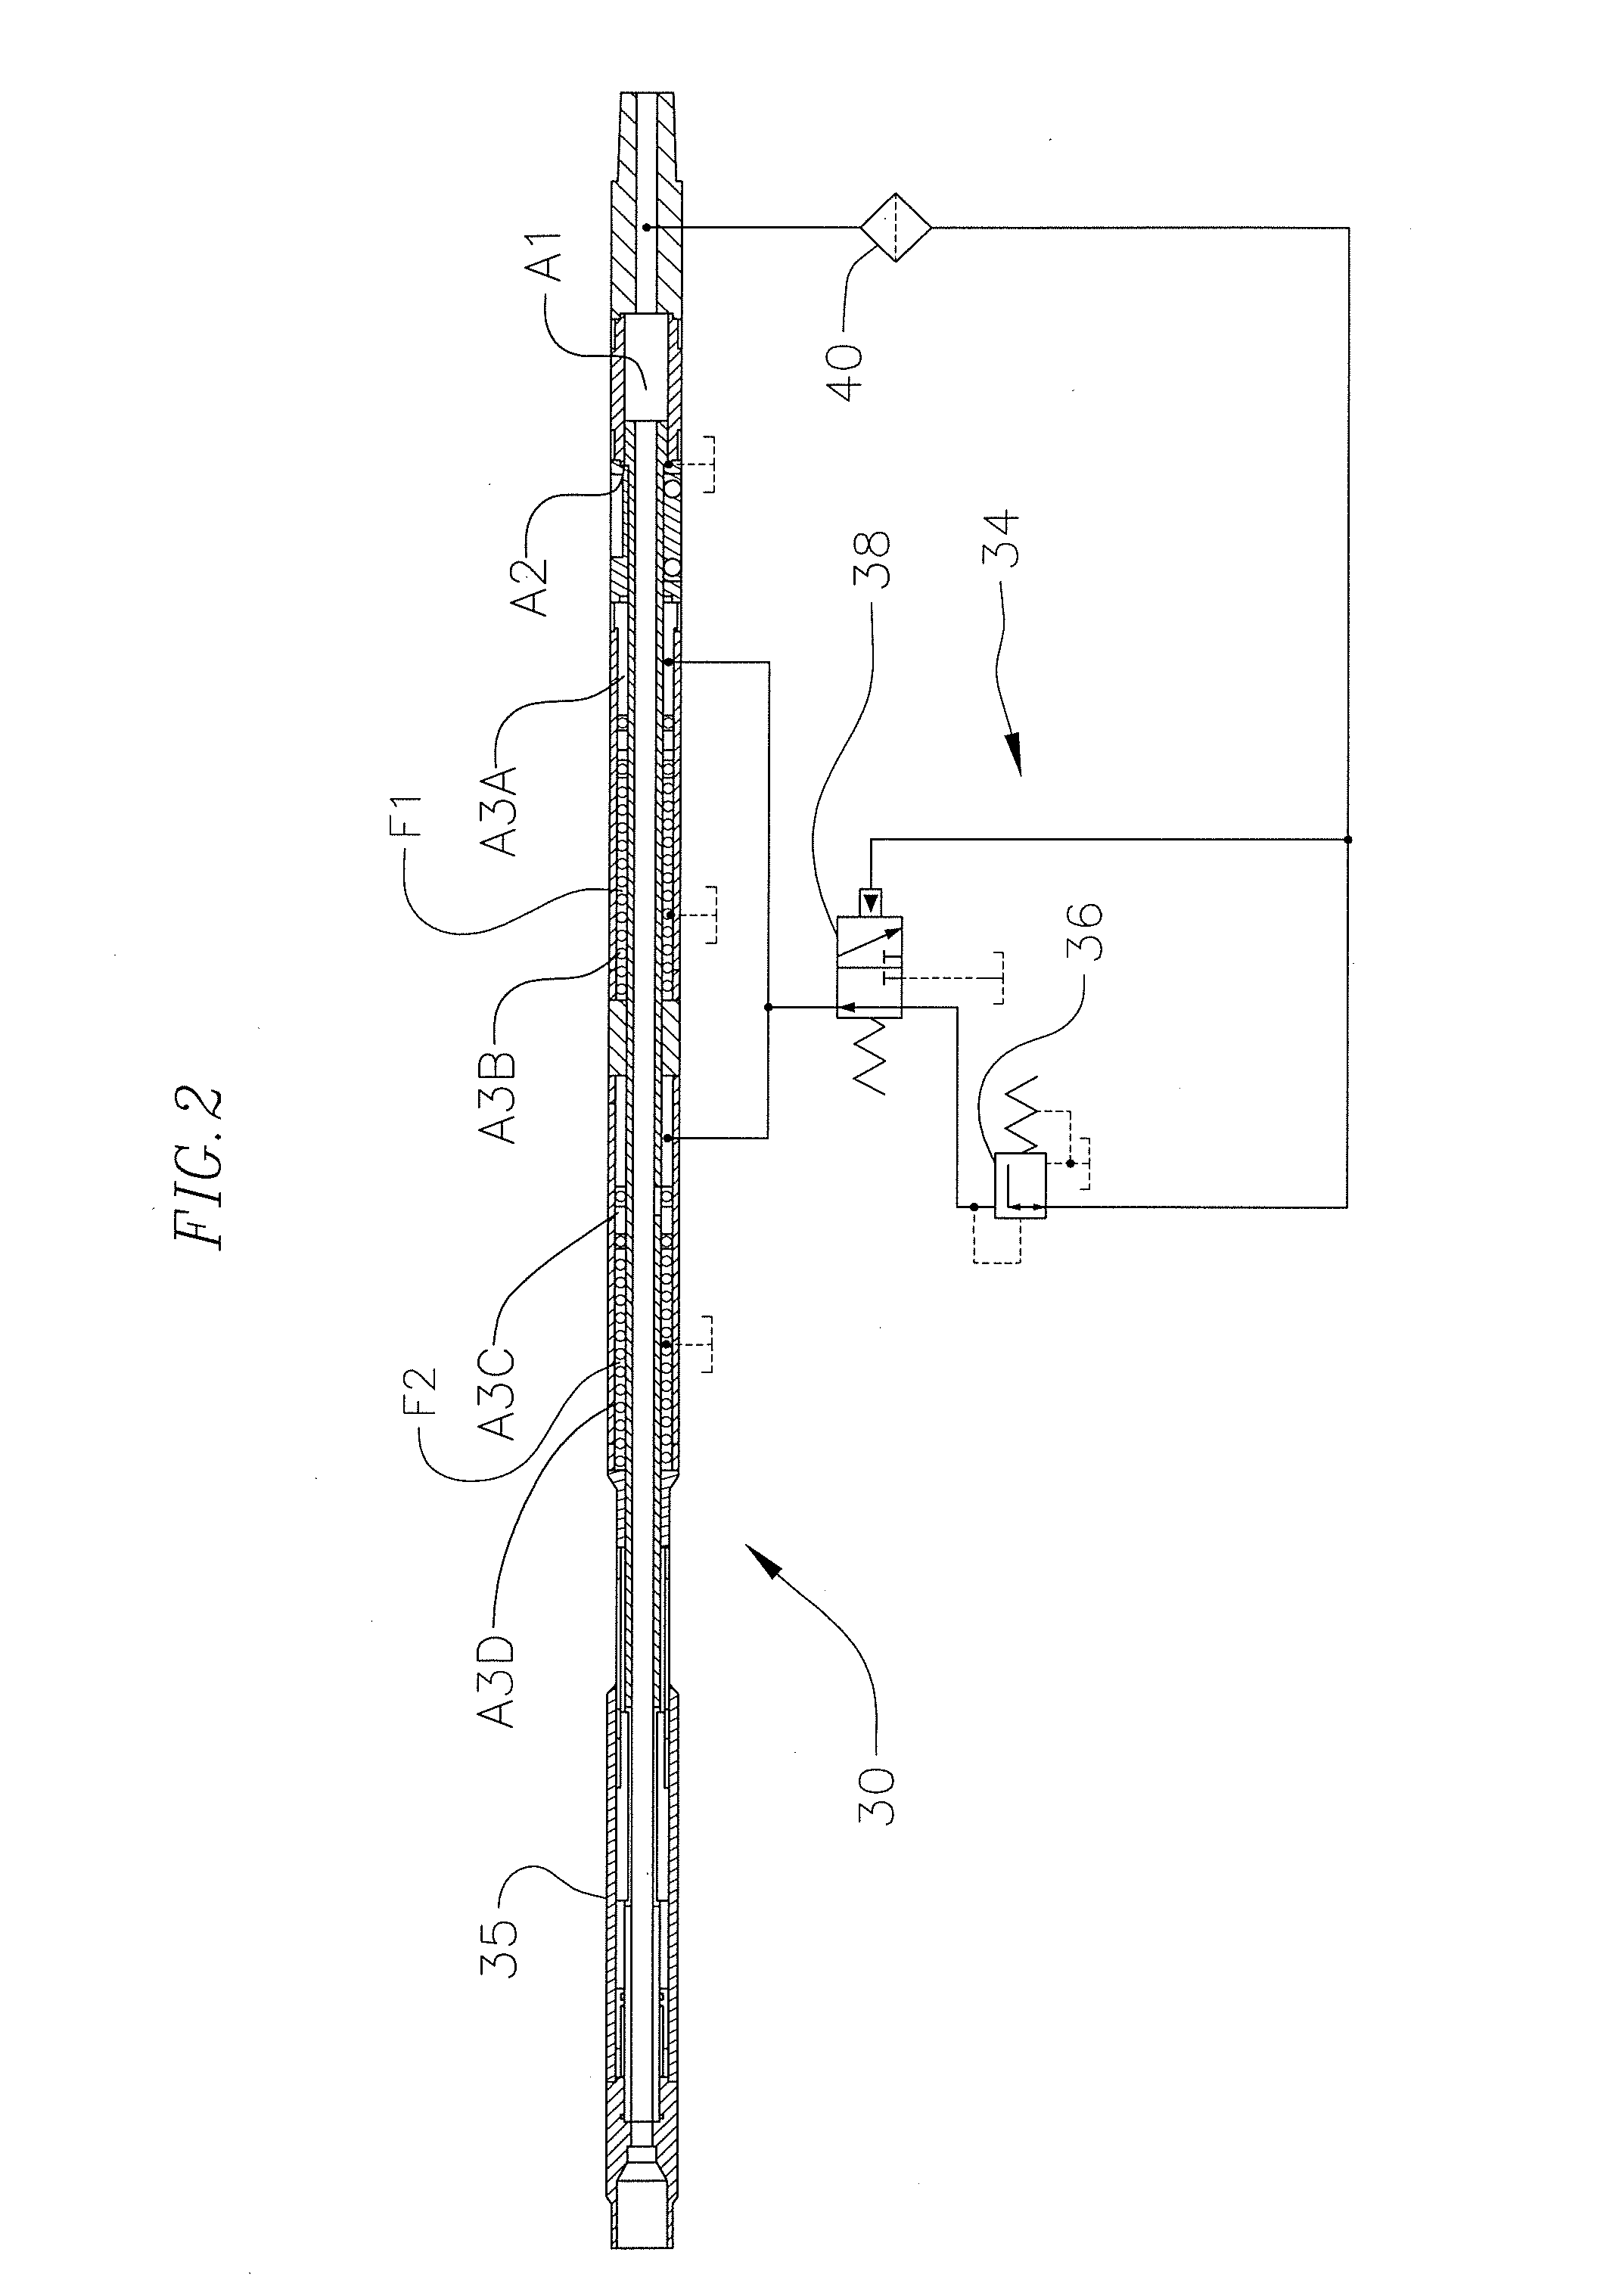 Spring-operated anti-stall tool